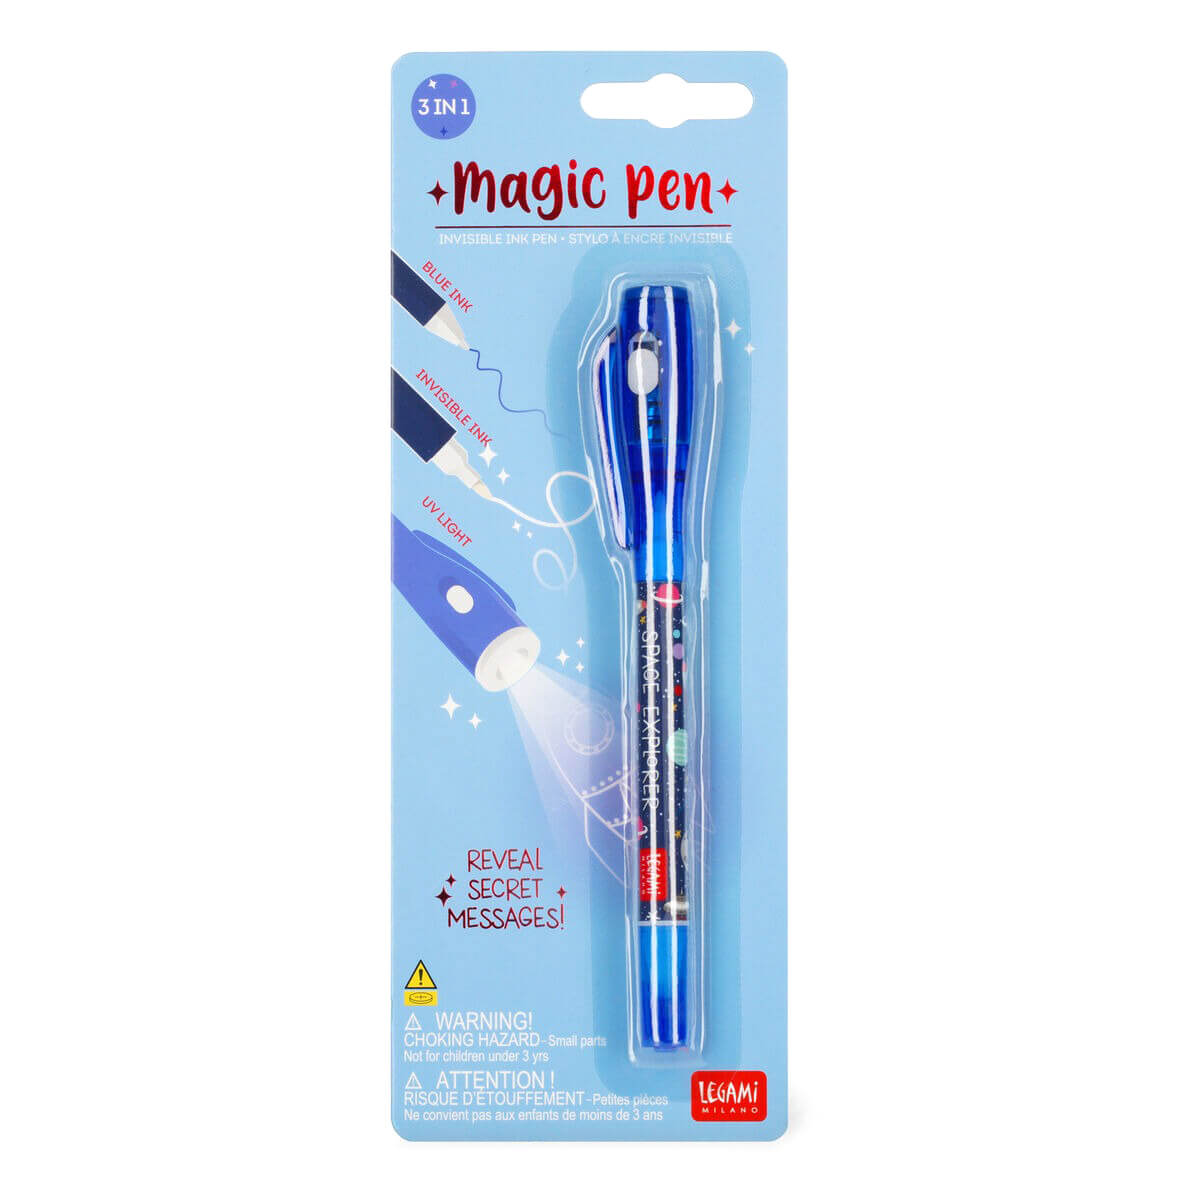 Space Invisible Ink Magic Pen by Legami – Junior Edition